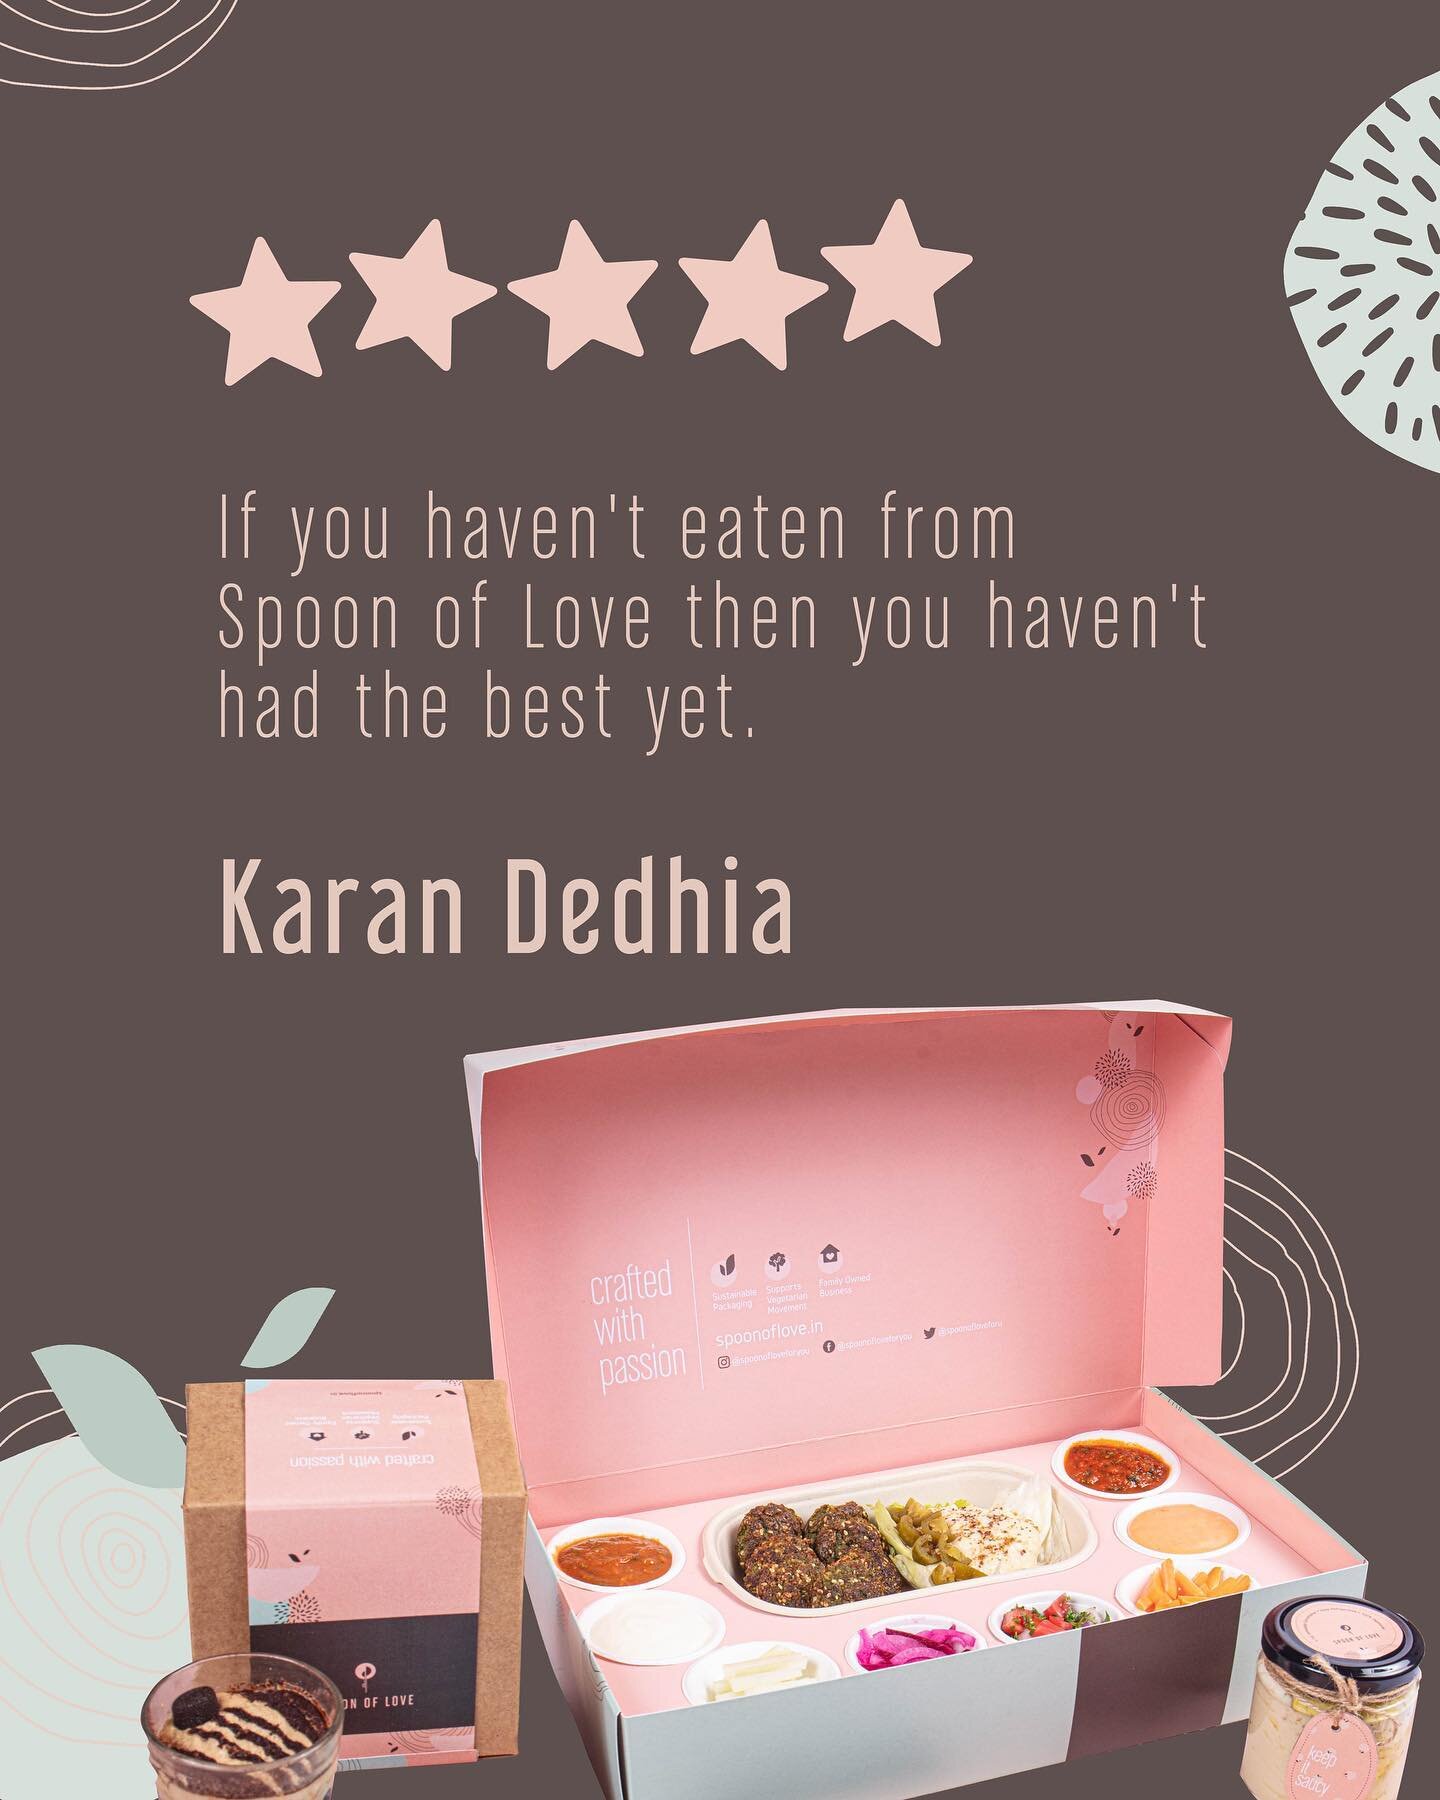 Someone recommended us as the &lsquo;best they have had&rsquo;, and we always have the best time reading through your kind reviews, and we can never get enough of them. 

Thank you Karan!

#SpoonOfLove #CraftedWithPassion
#Testimonials #CustomerRevie